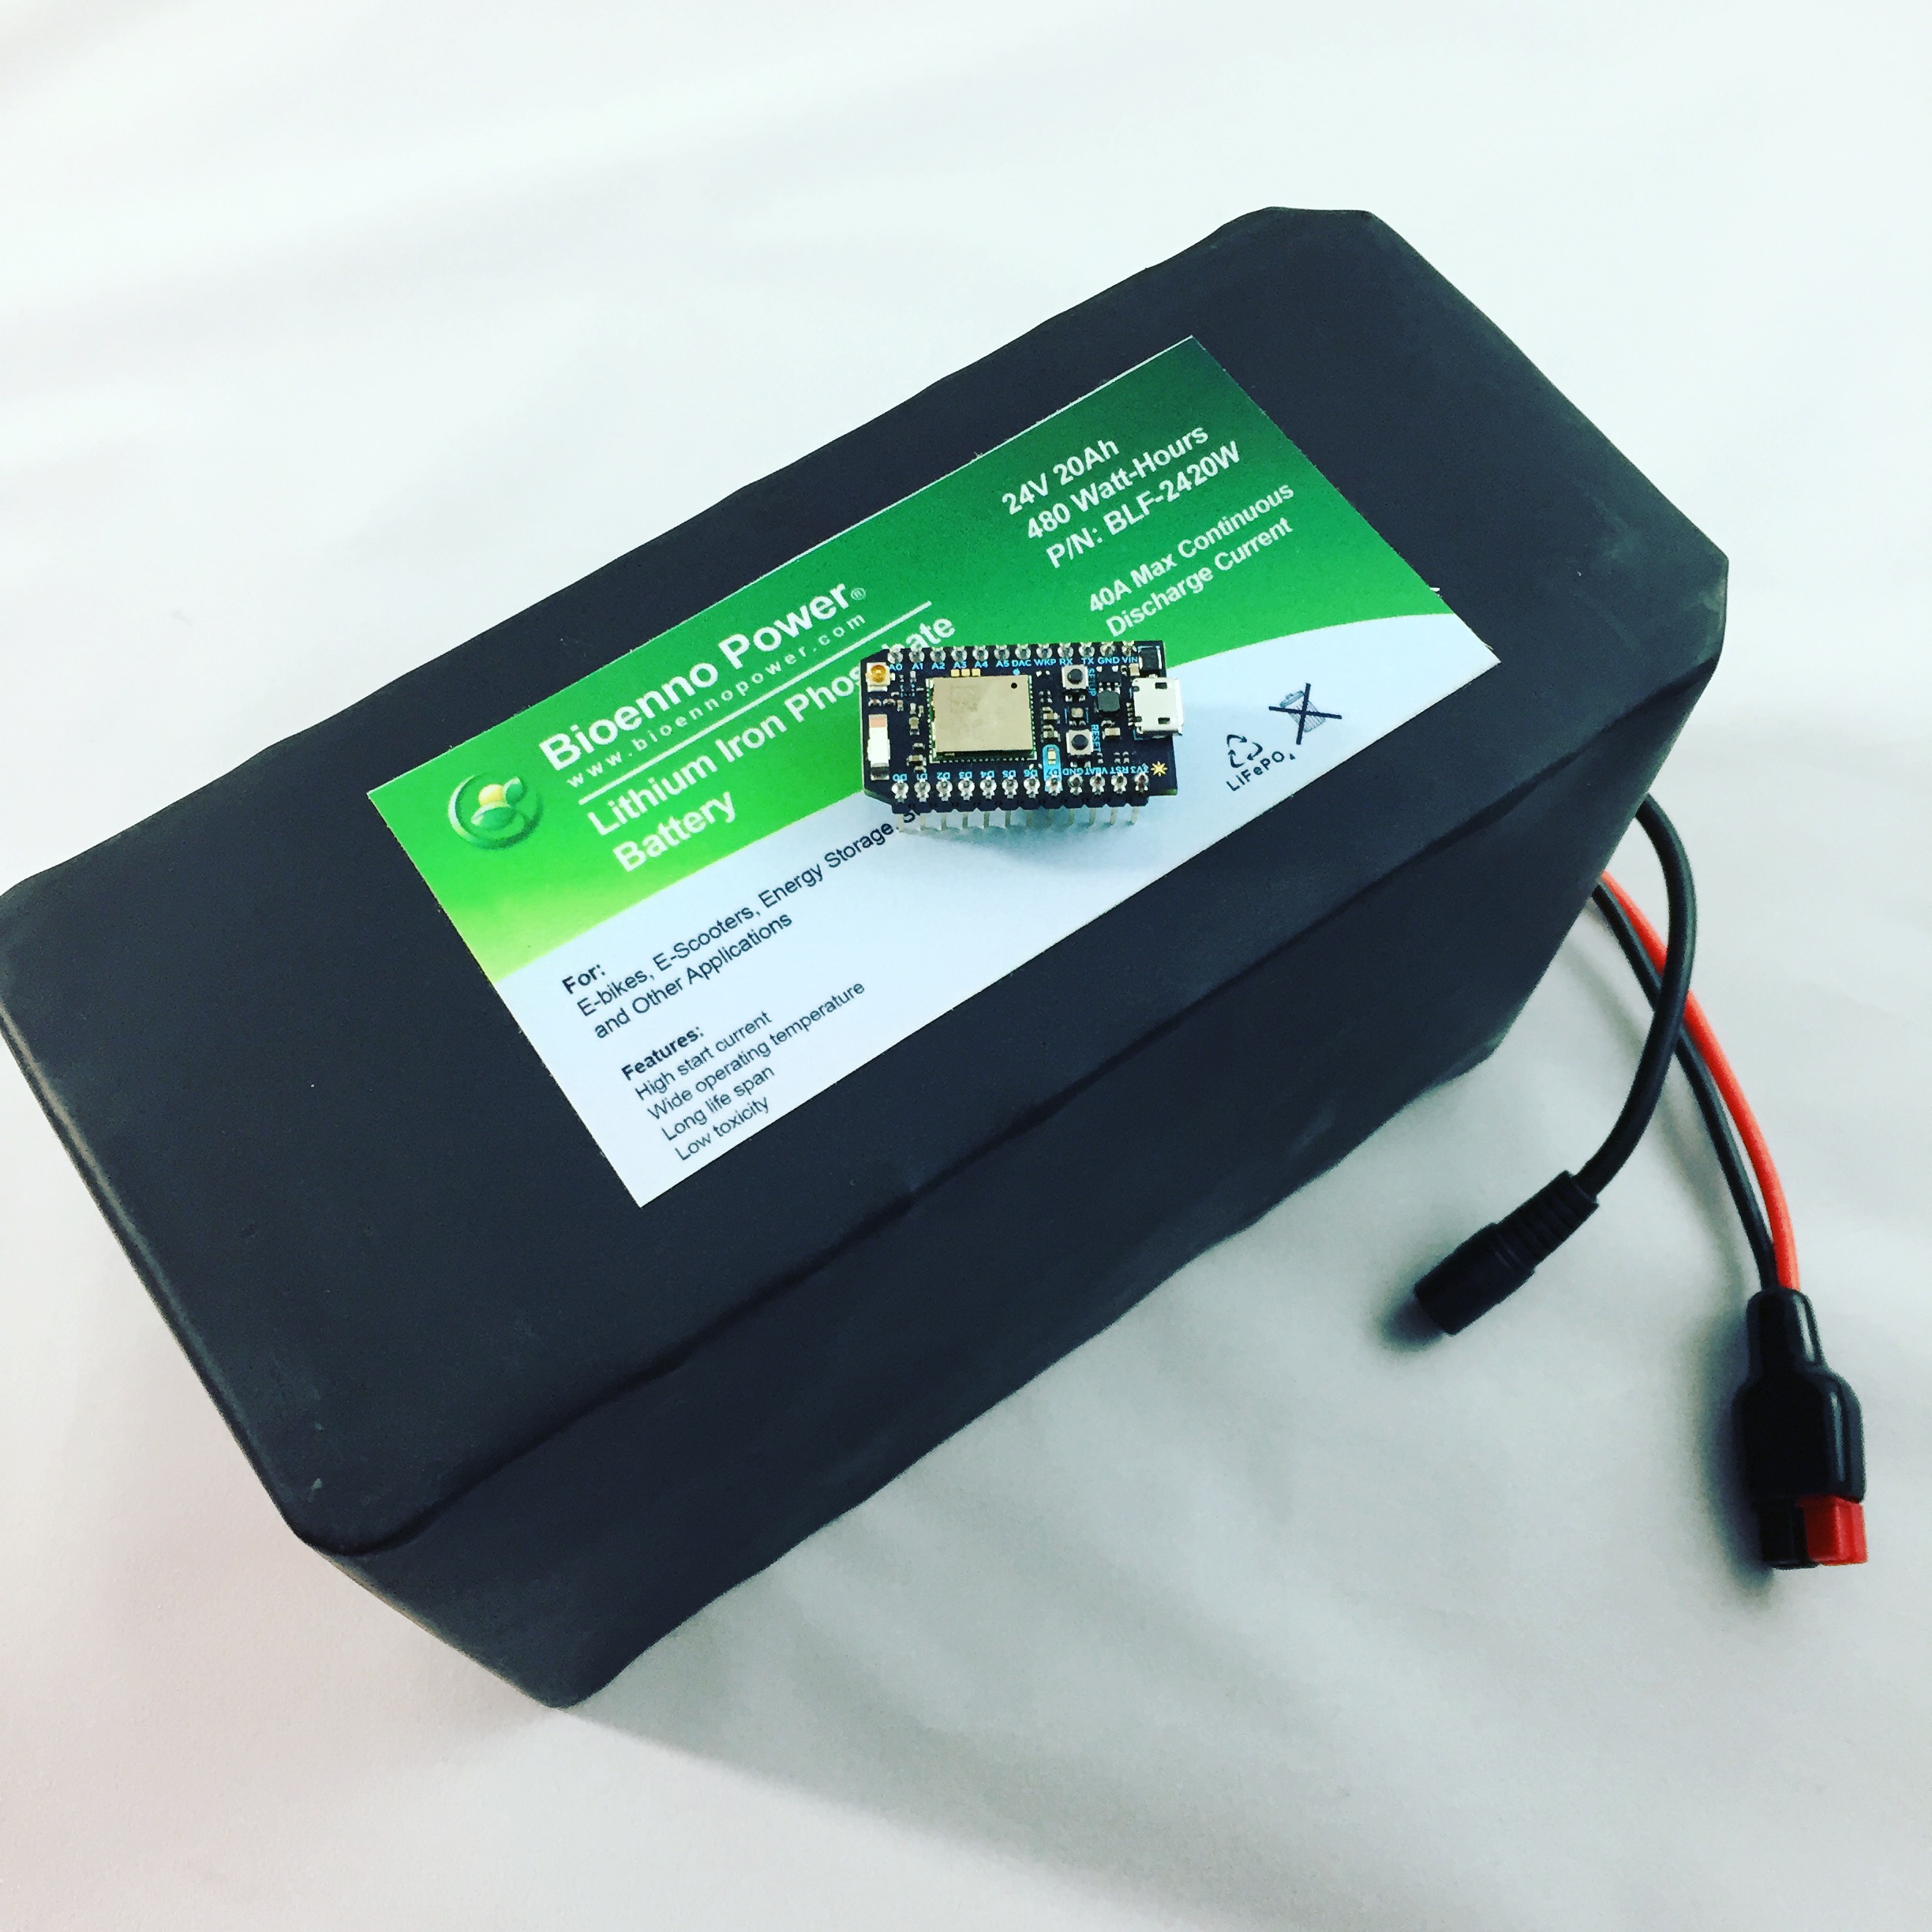 LiFePO4 Scooter Battery | DailyIoT 029